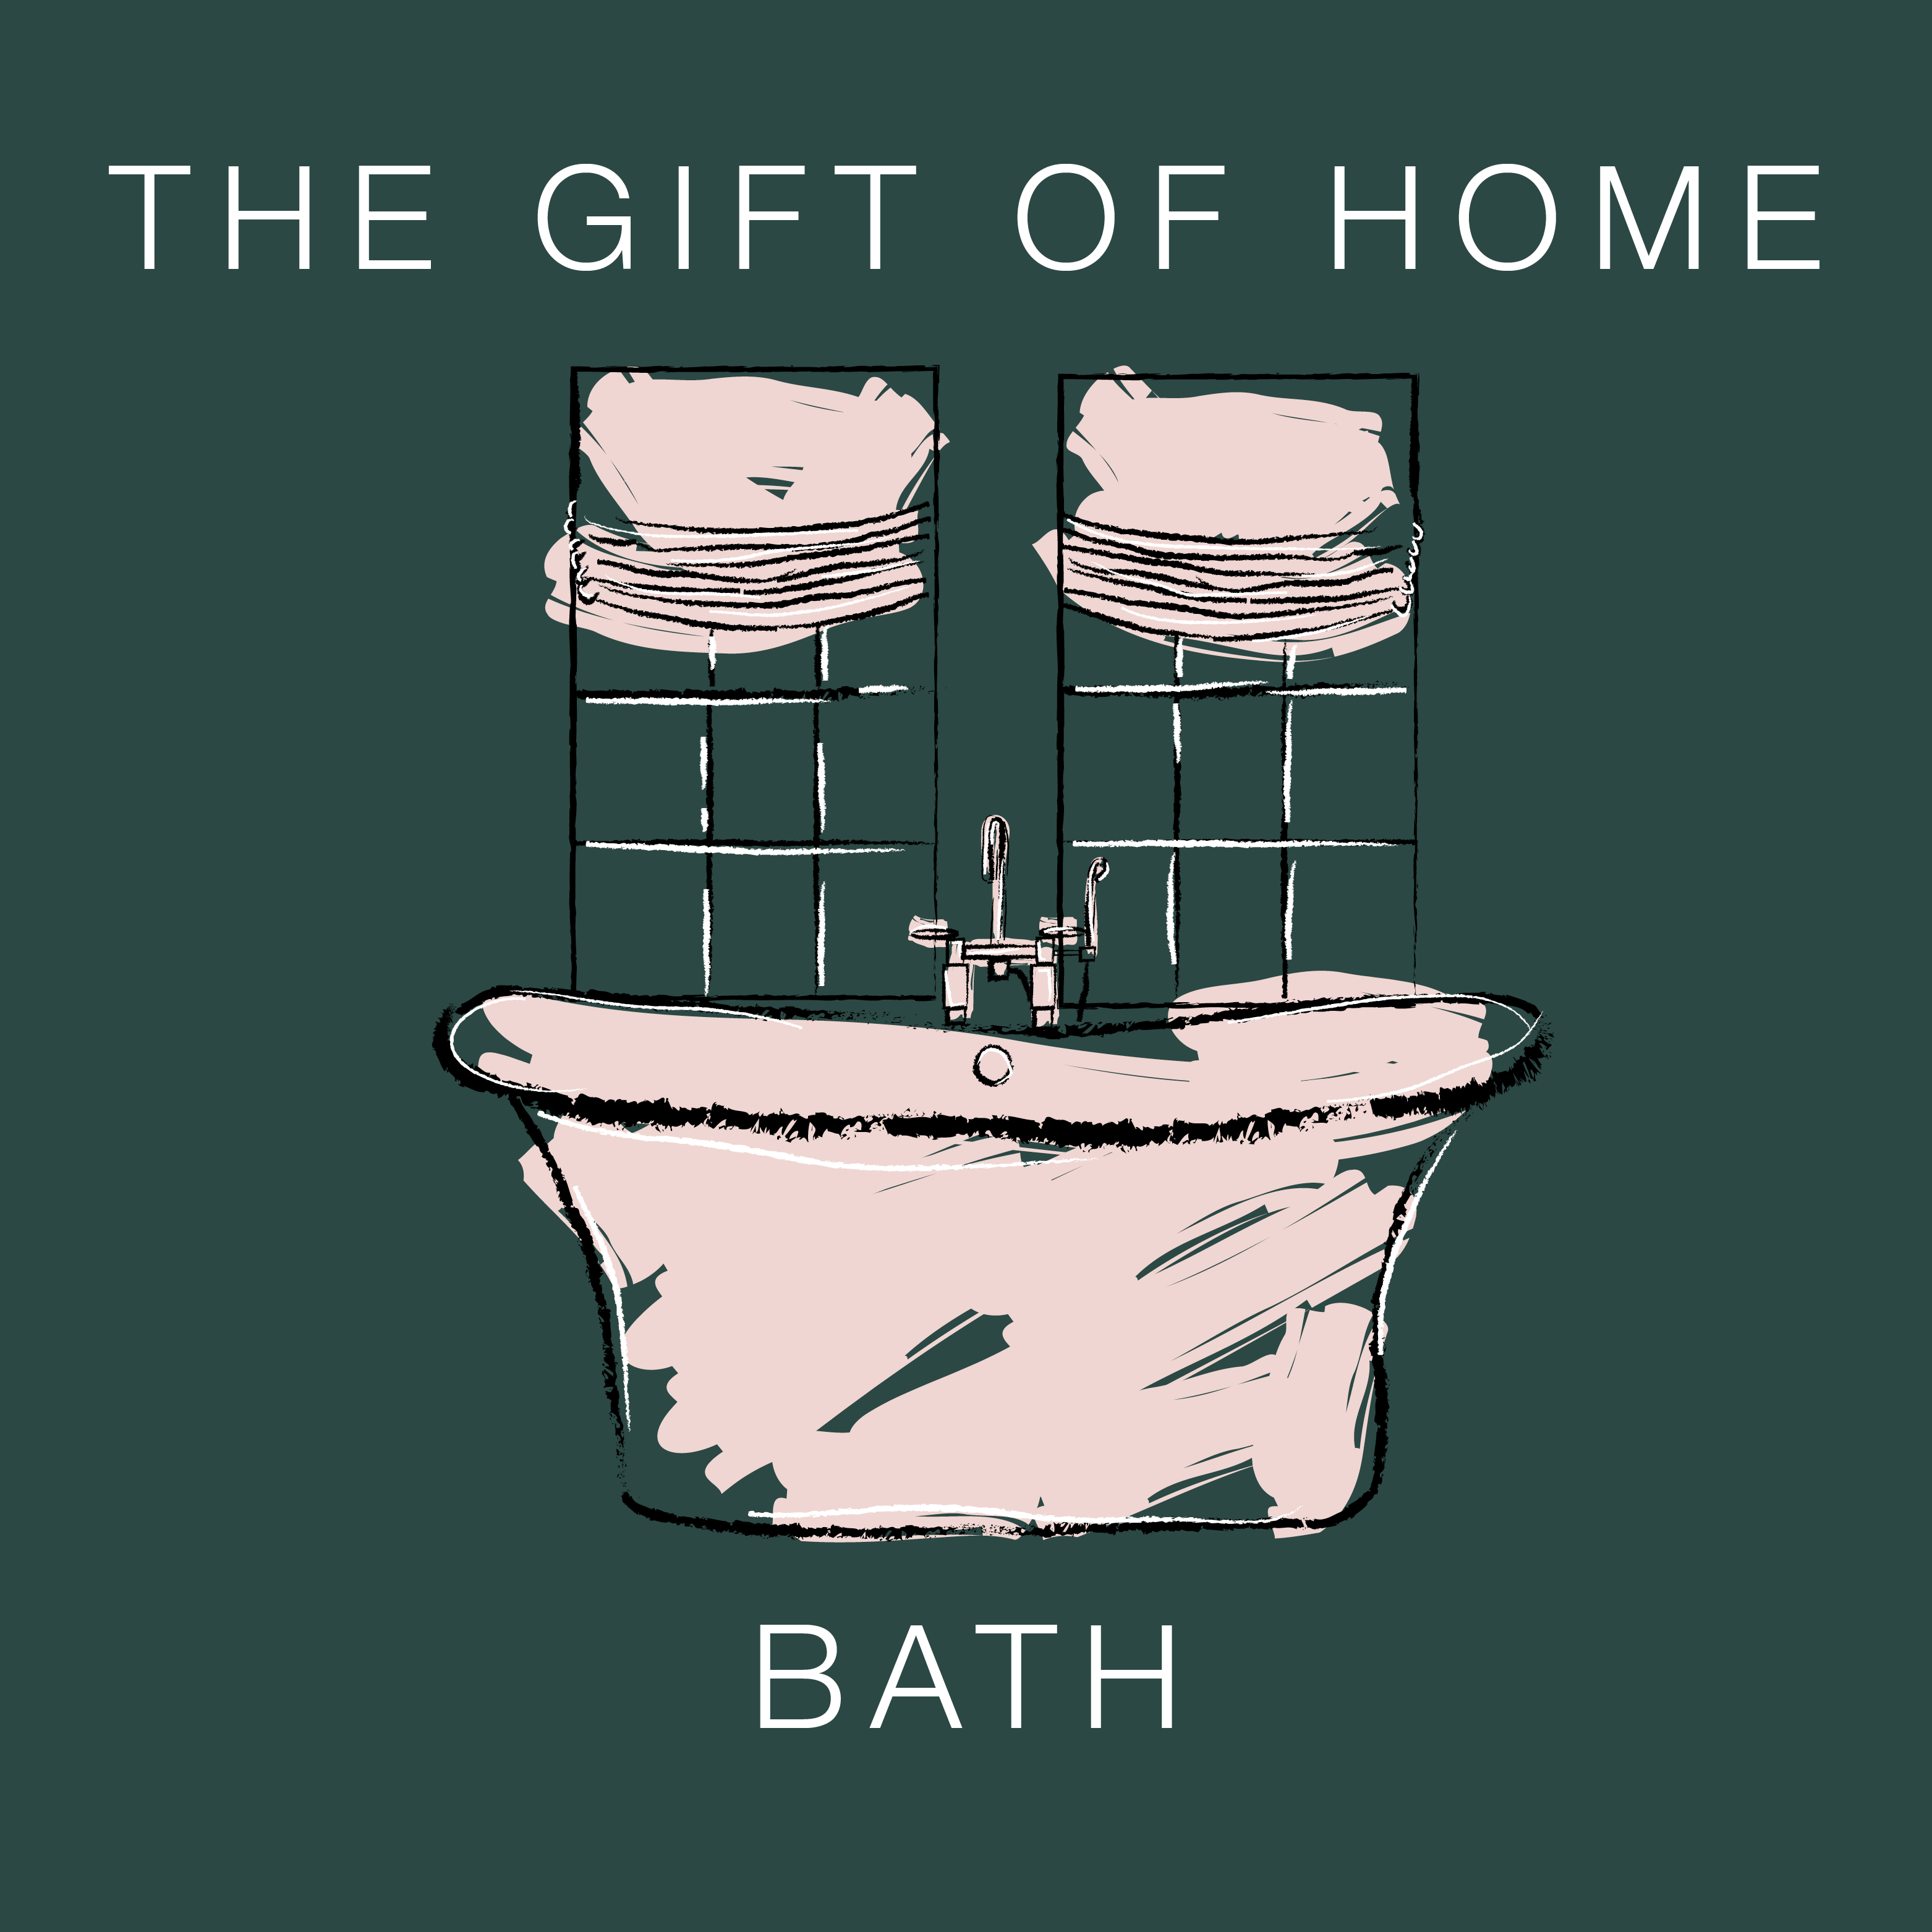 The Gift of Home